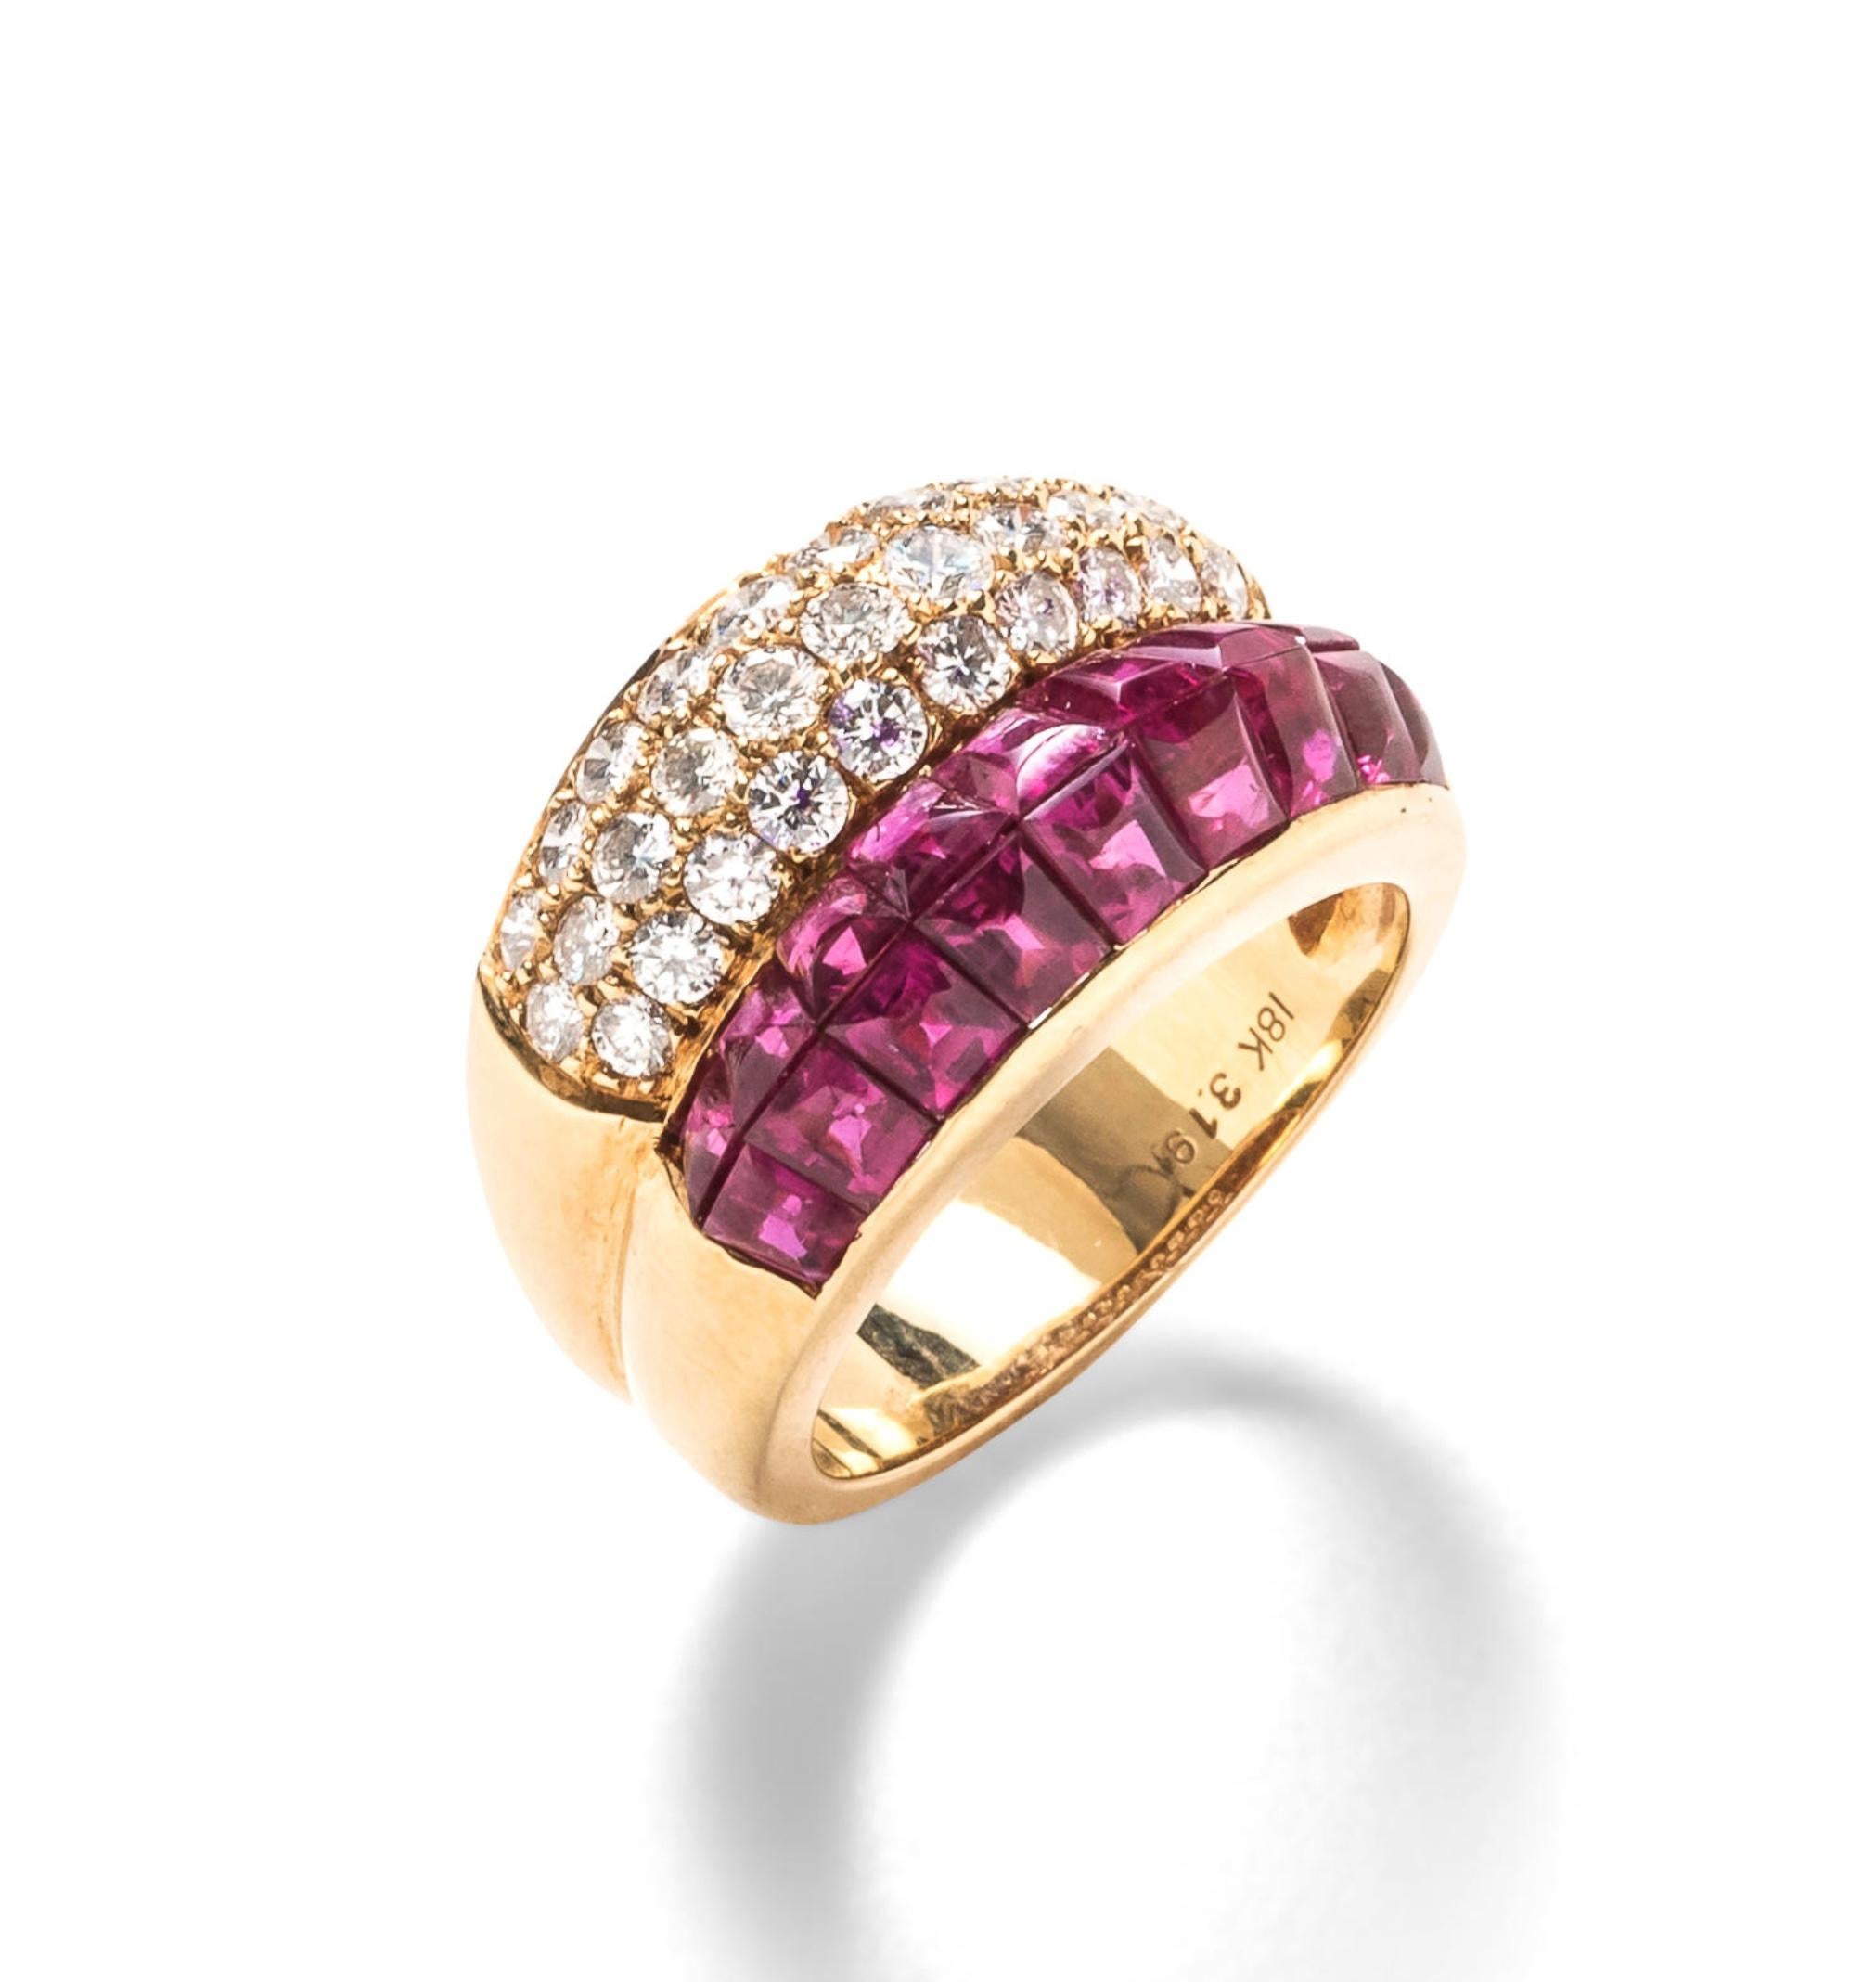 Gold ruby diamond ring 

Channel-set rubies of 3.19 carats, full-cut diamonds of 0.98 carat; 18 karat yellow gold

Size: 6.75 US
Total weight: 13.1 grams 